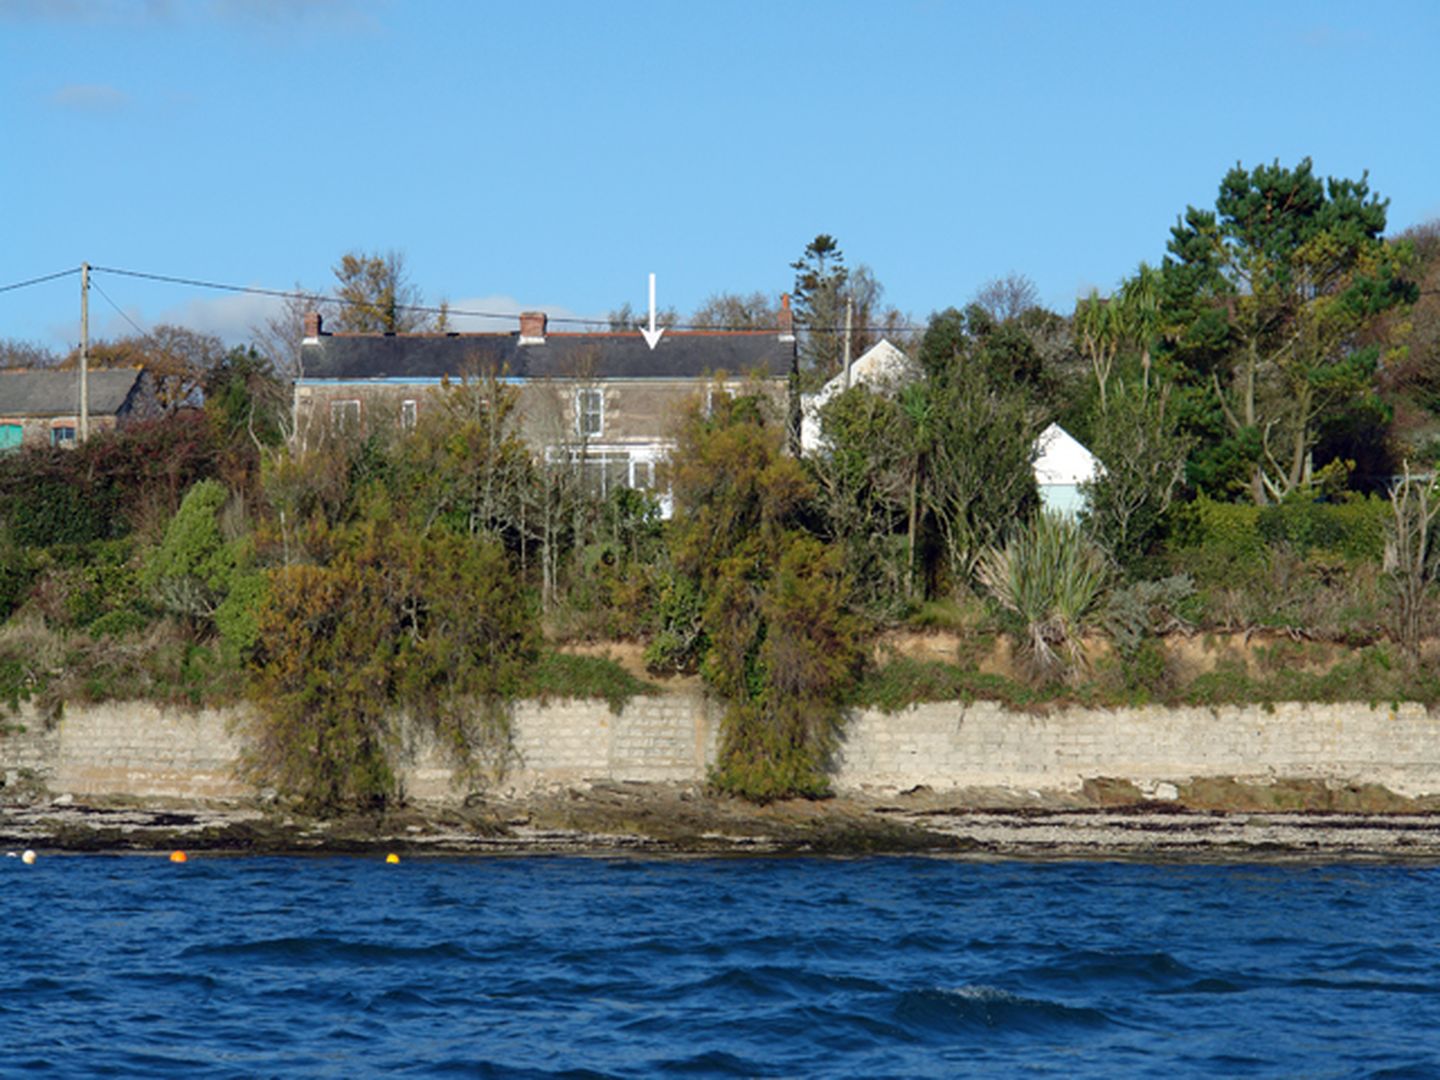 Nanvivian Feock View Of Cottage From Sea